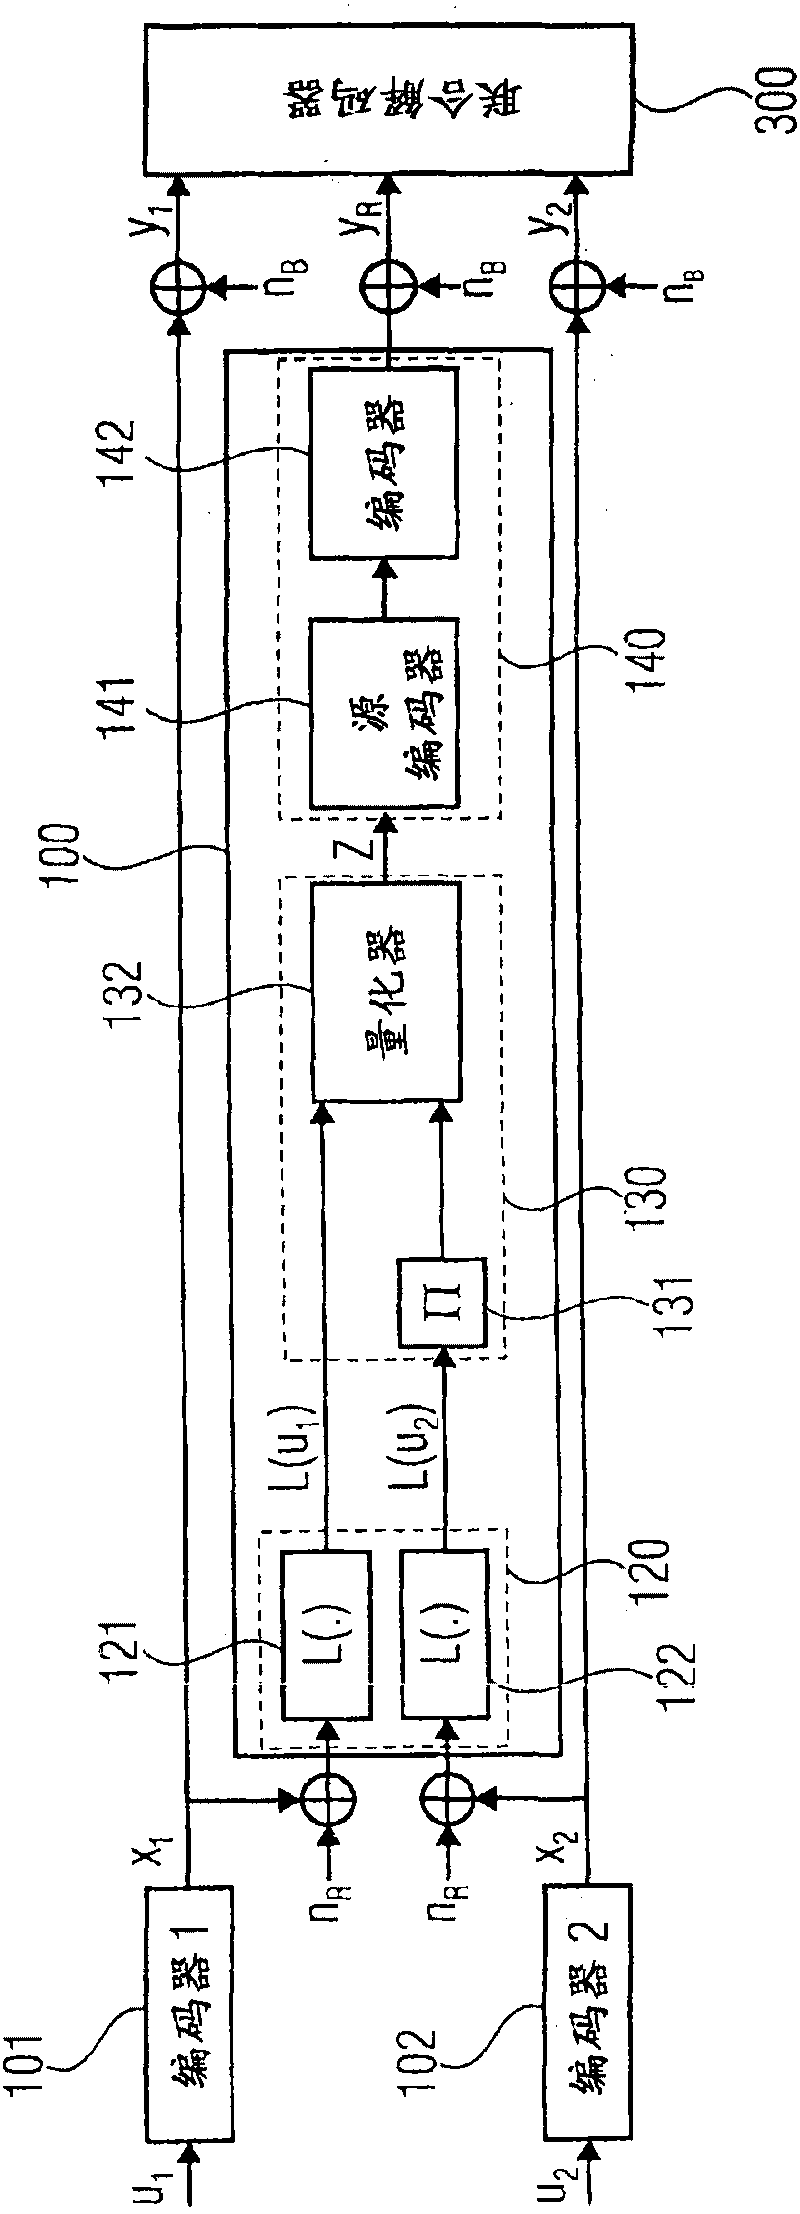 Relay station for a mobile communication system